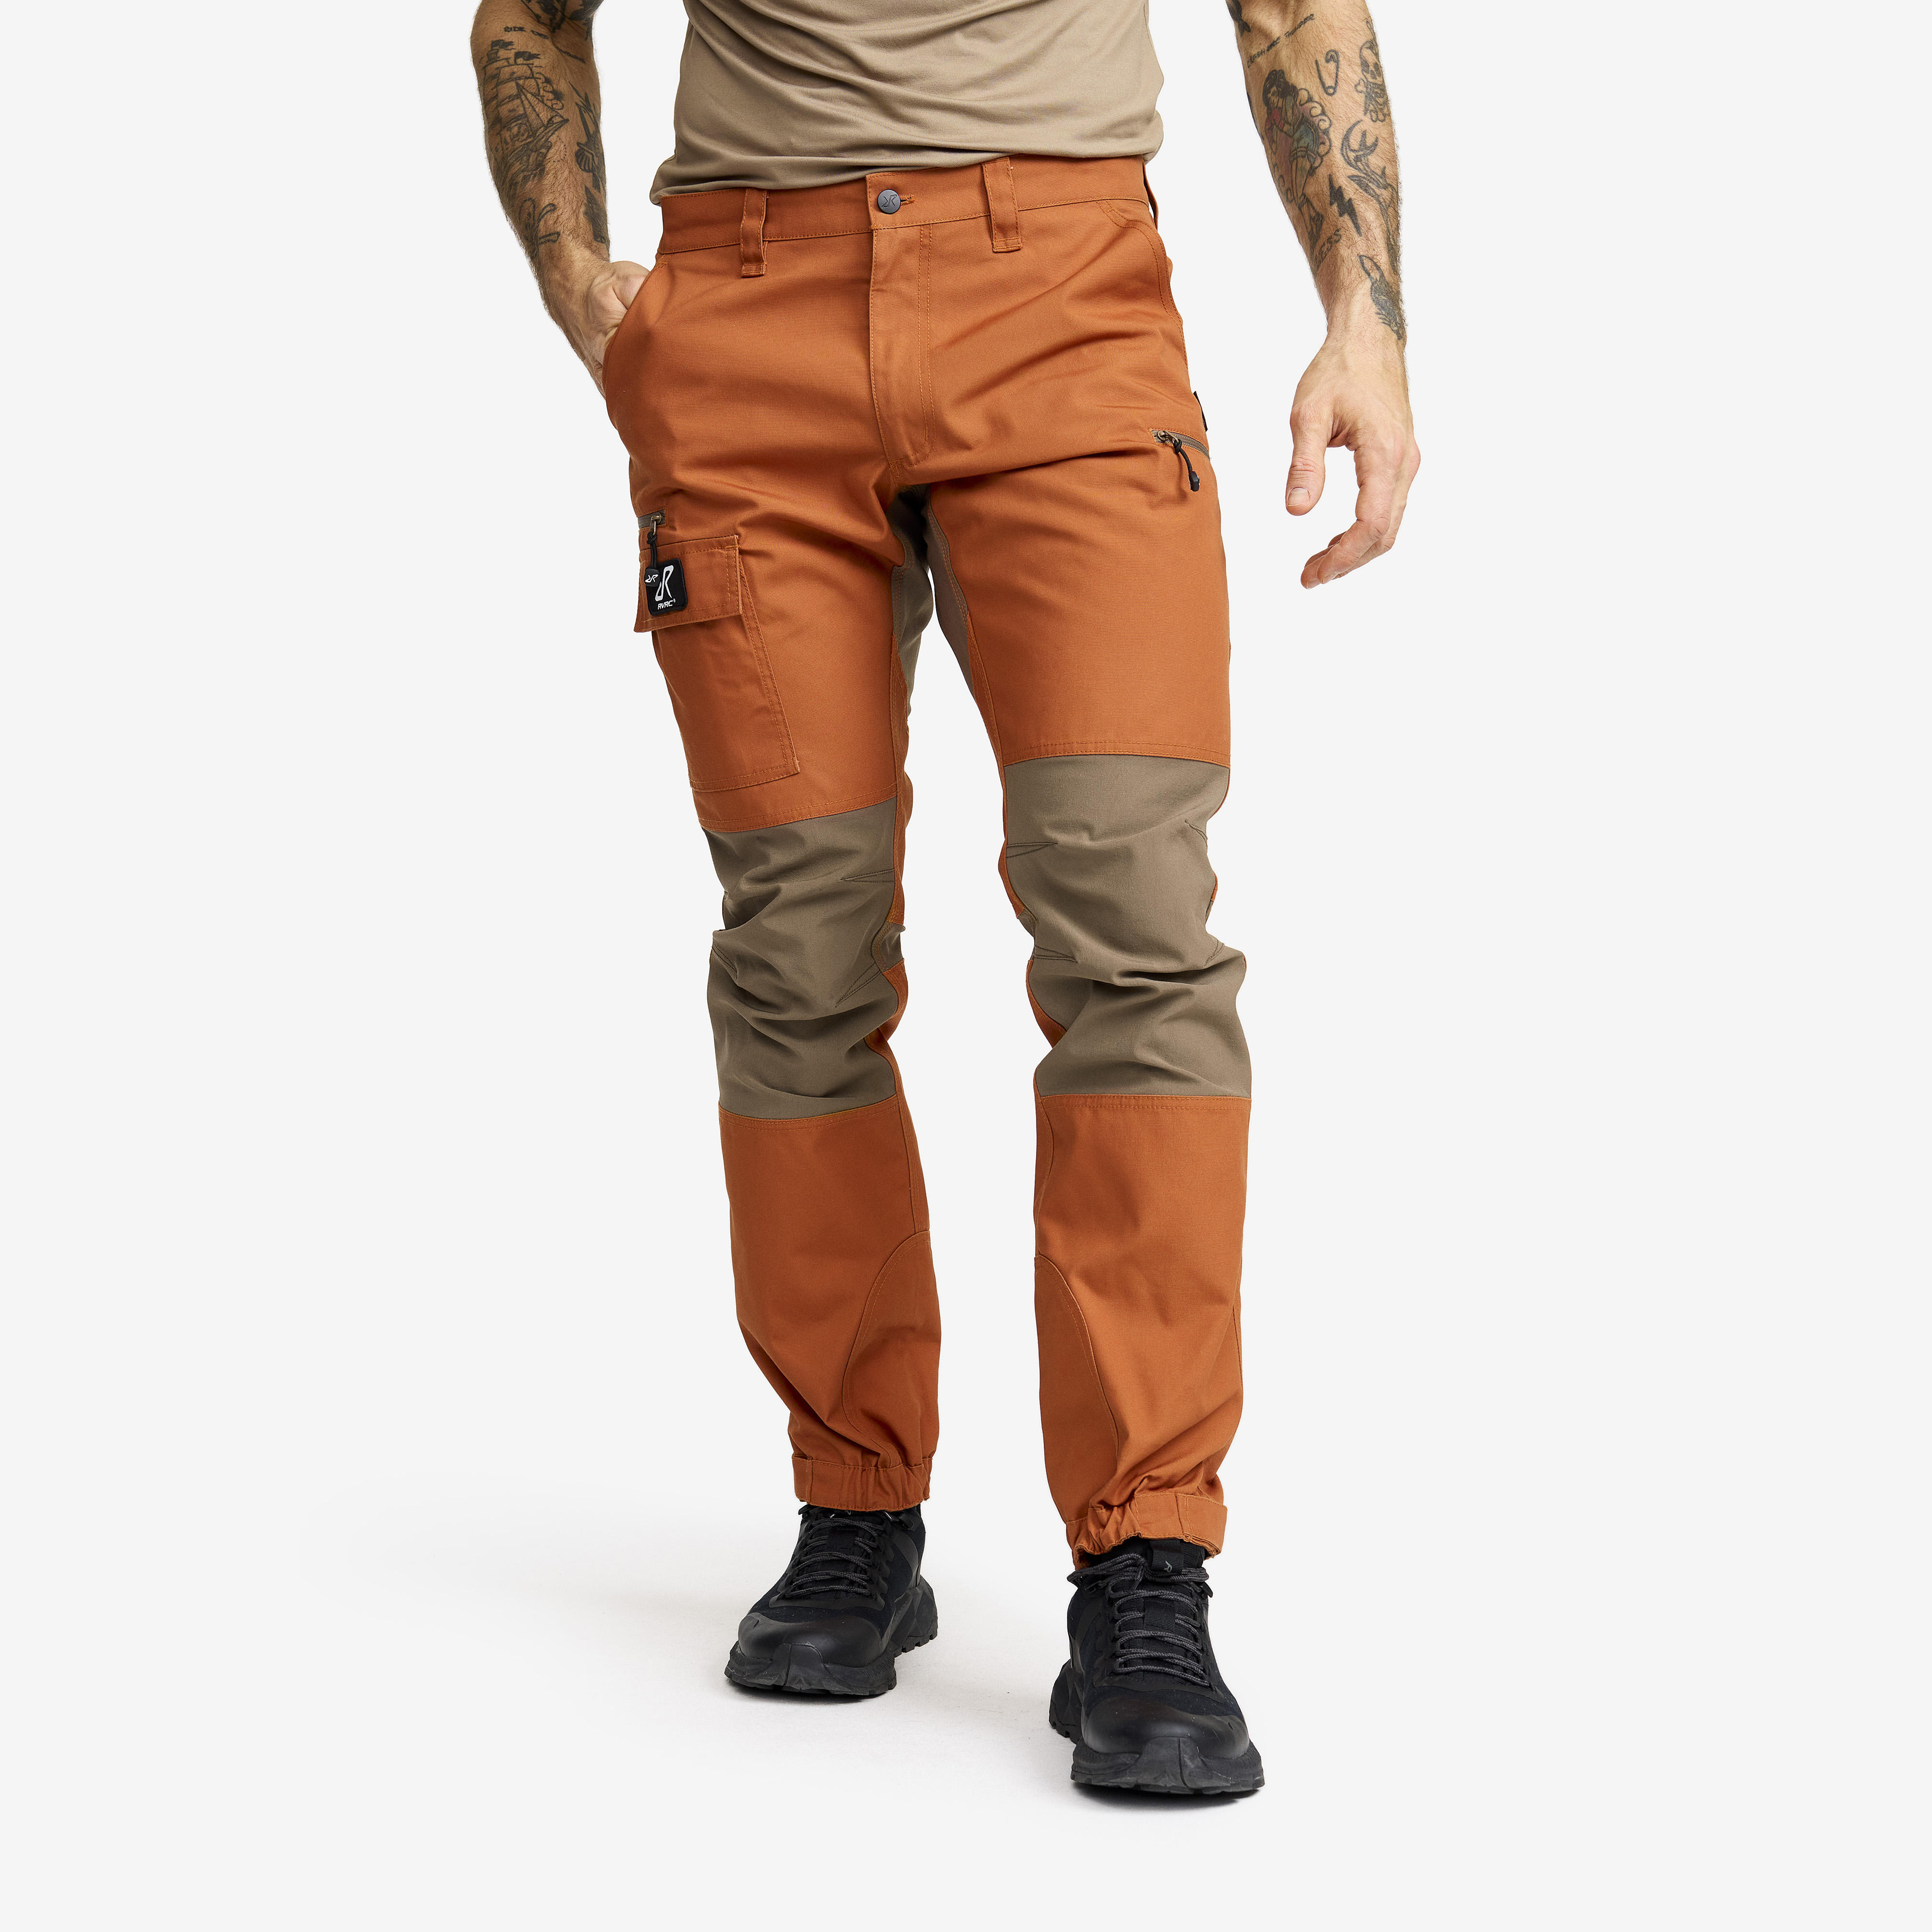 Nordwand Pants Teracotta Brown/chocolate Chip Uomo